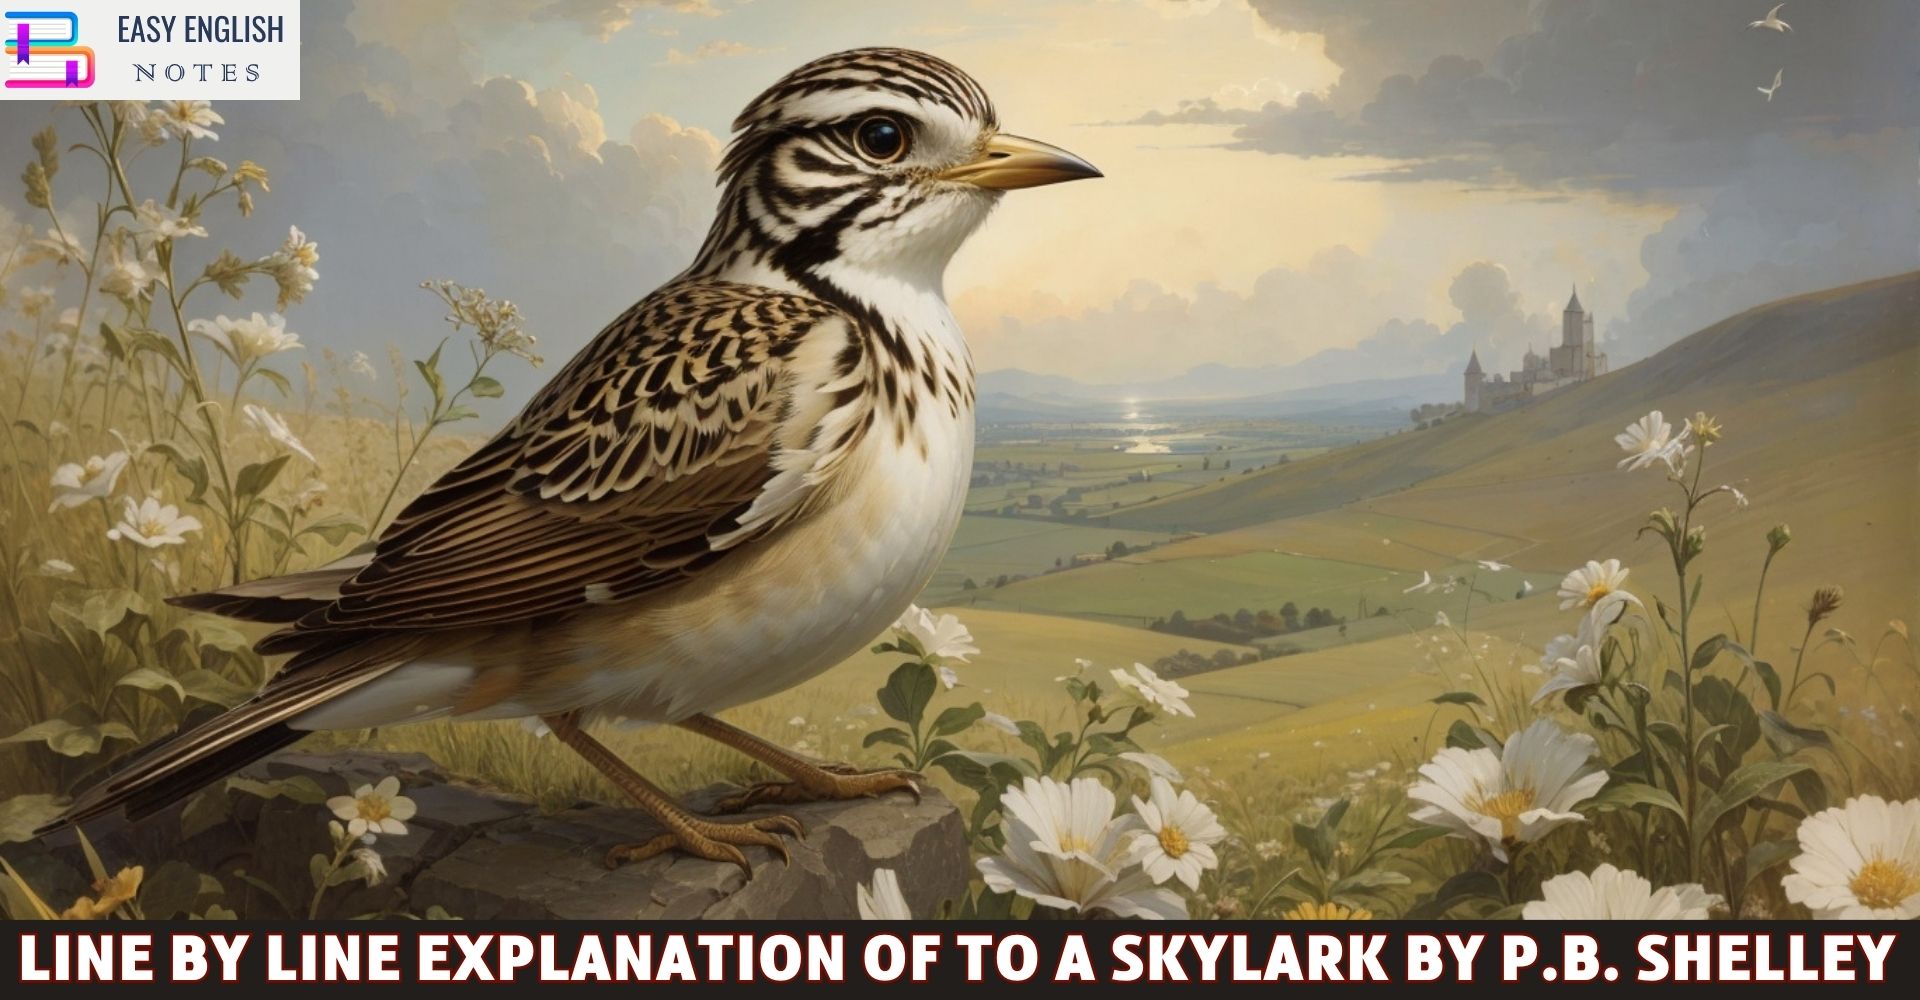 Line By Line Explanation Of To A Skylark By P.B. Shelley